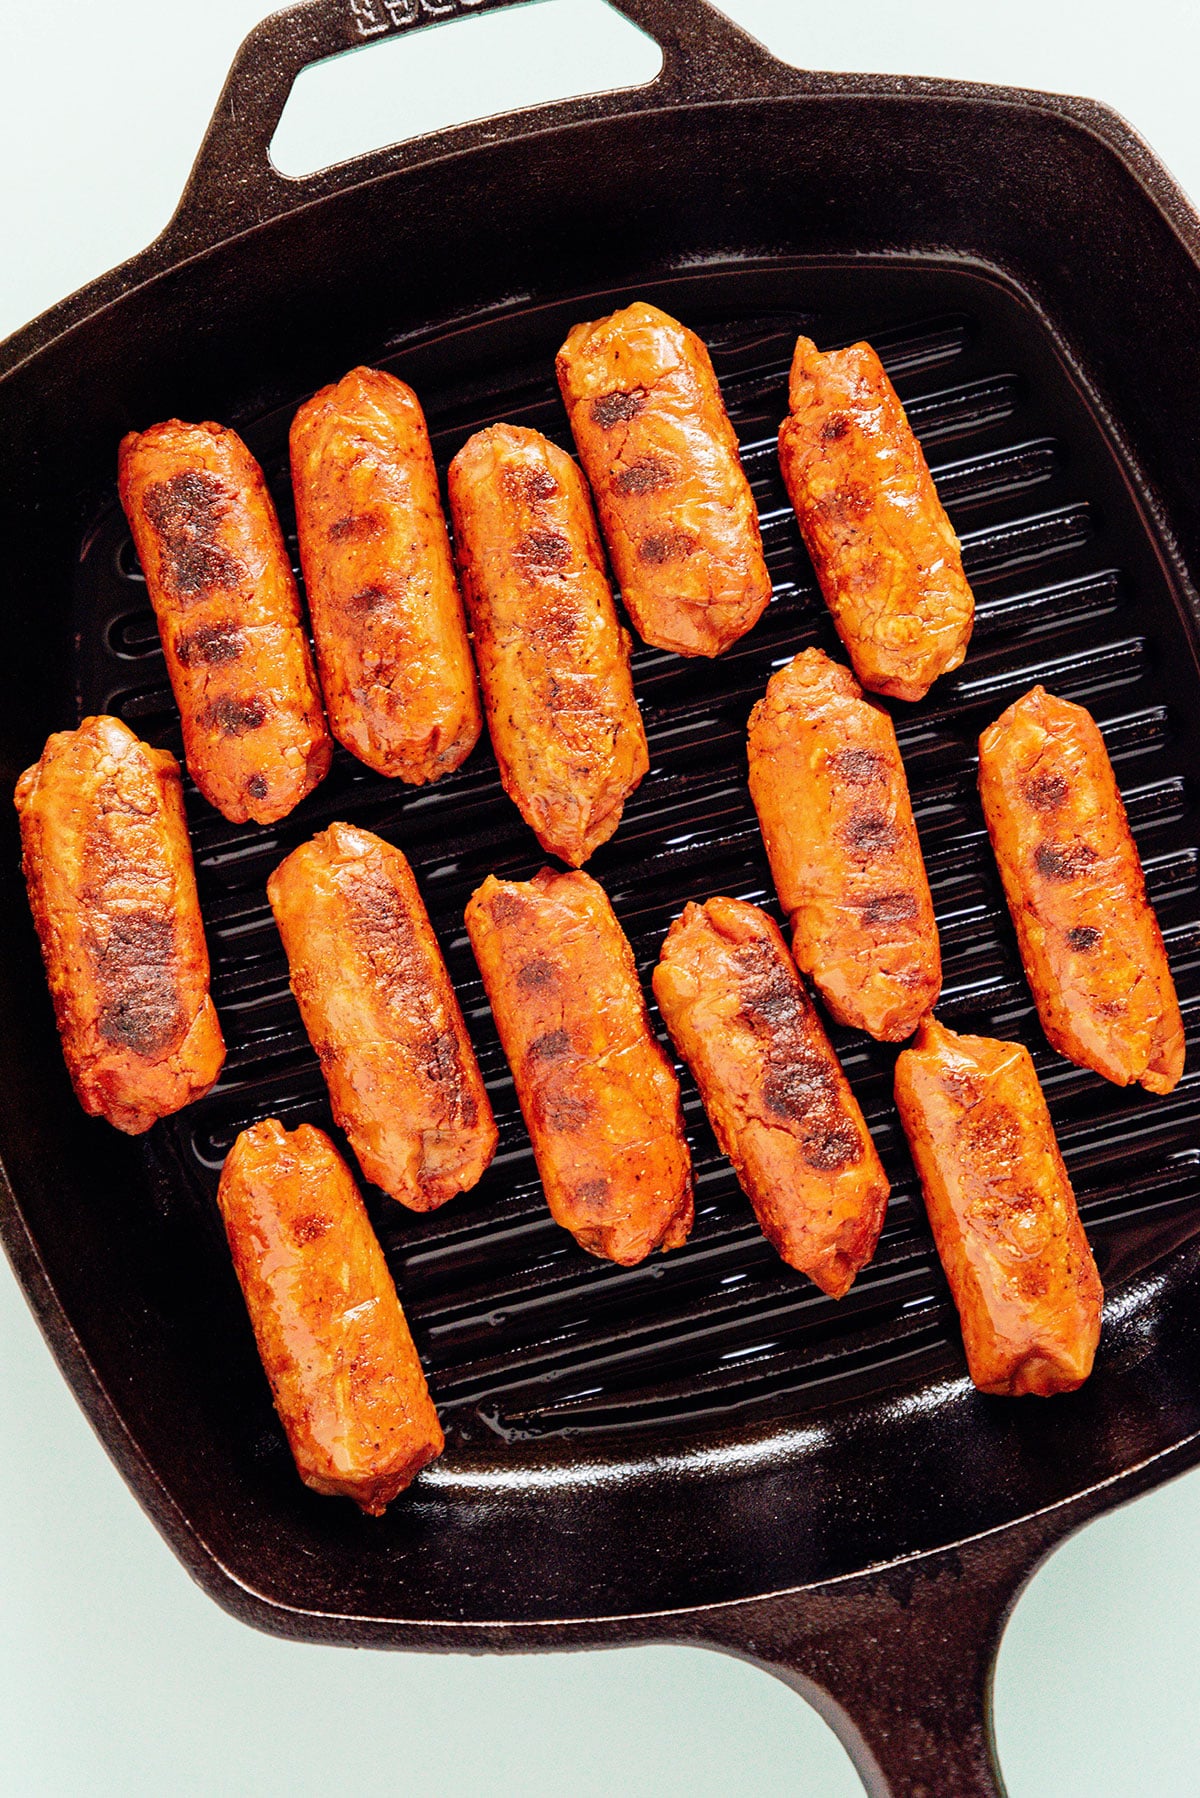 Steamed vegan sausages on a cast iron grill pan.